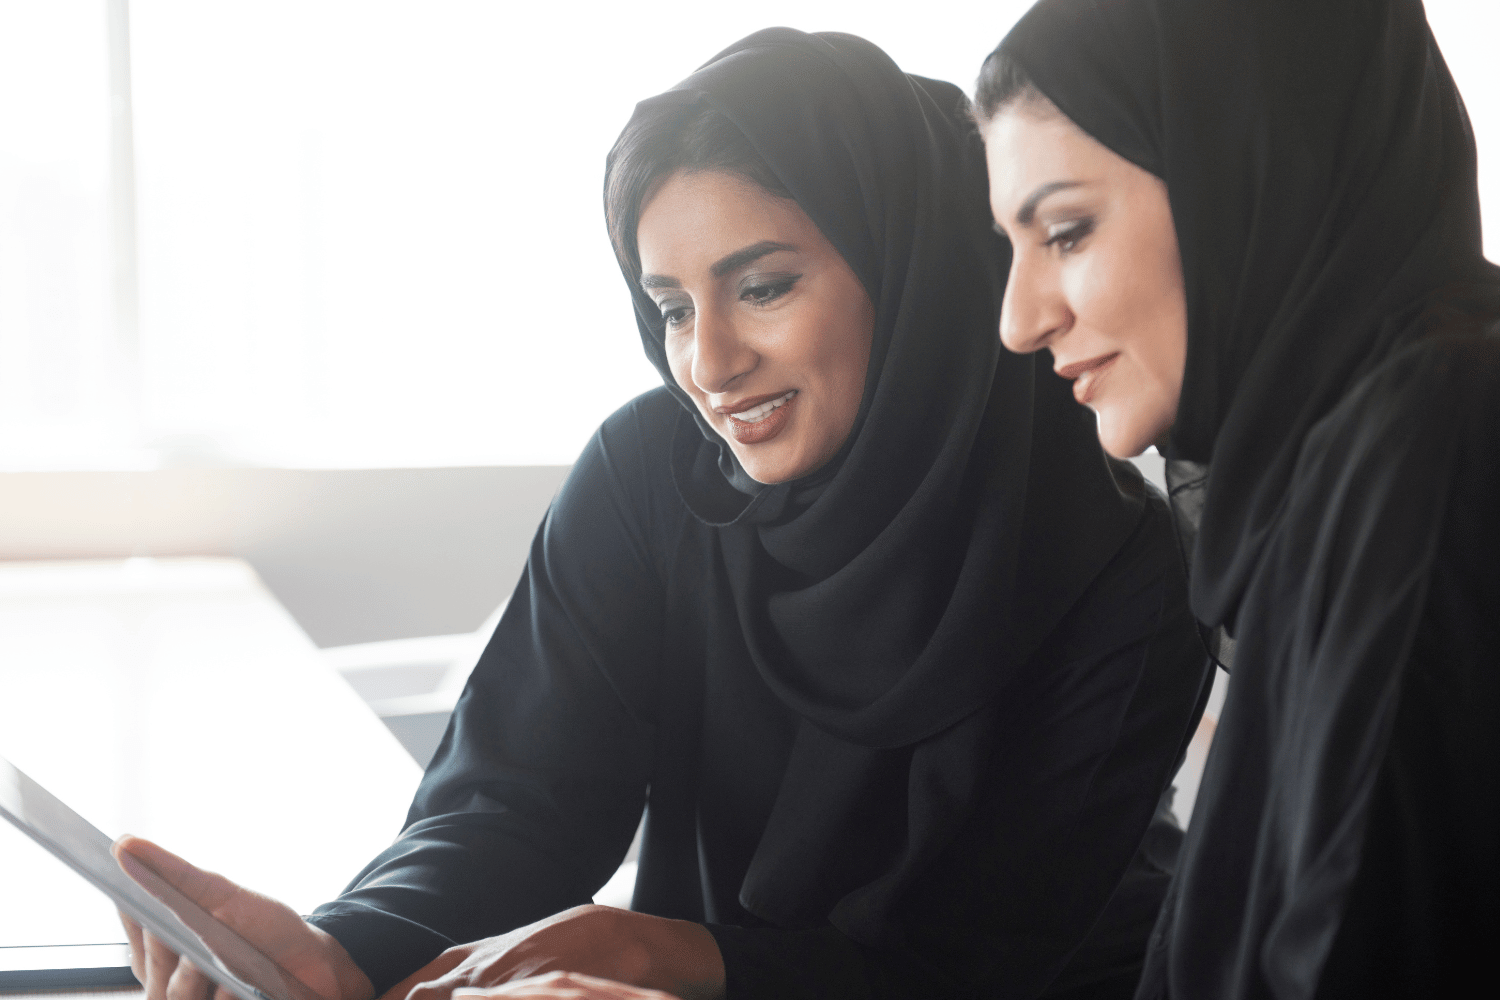 Saudi manager helping coach and mentor a fellow employee to help empower her